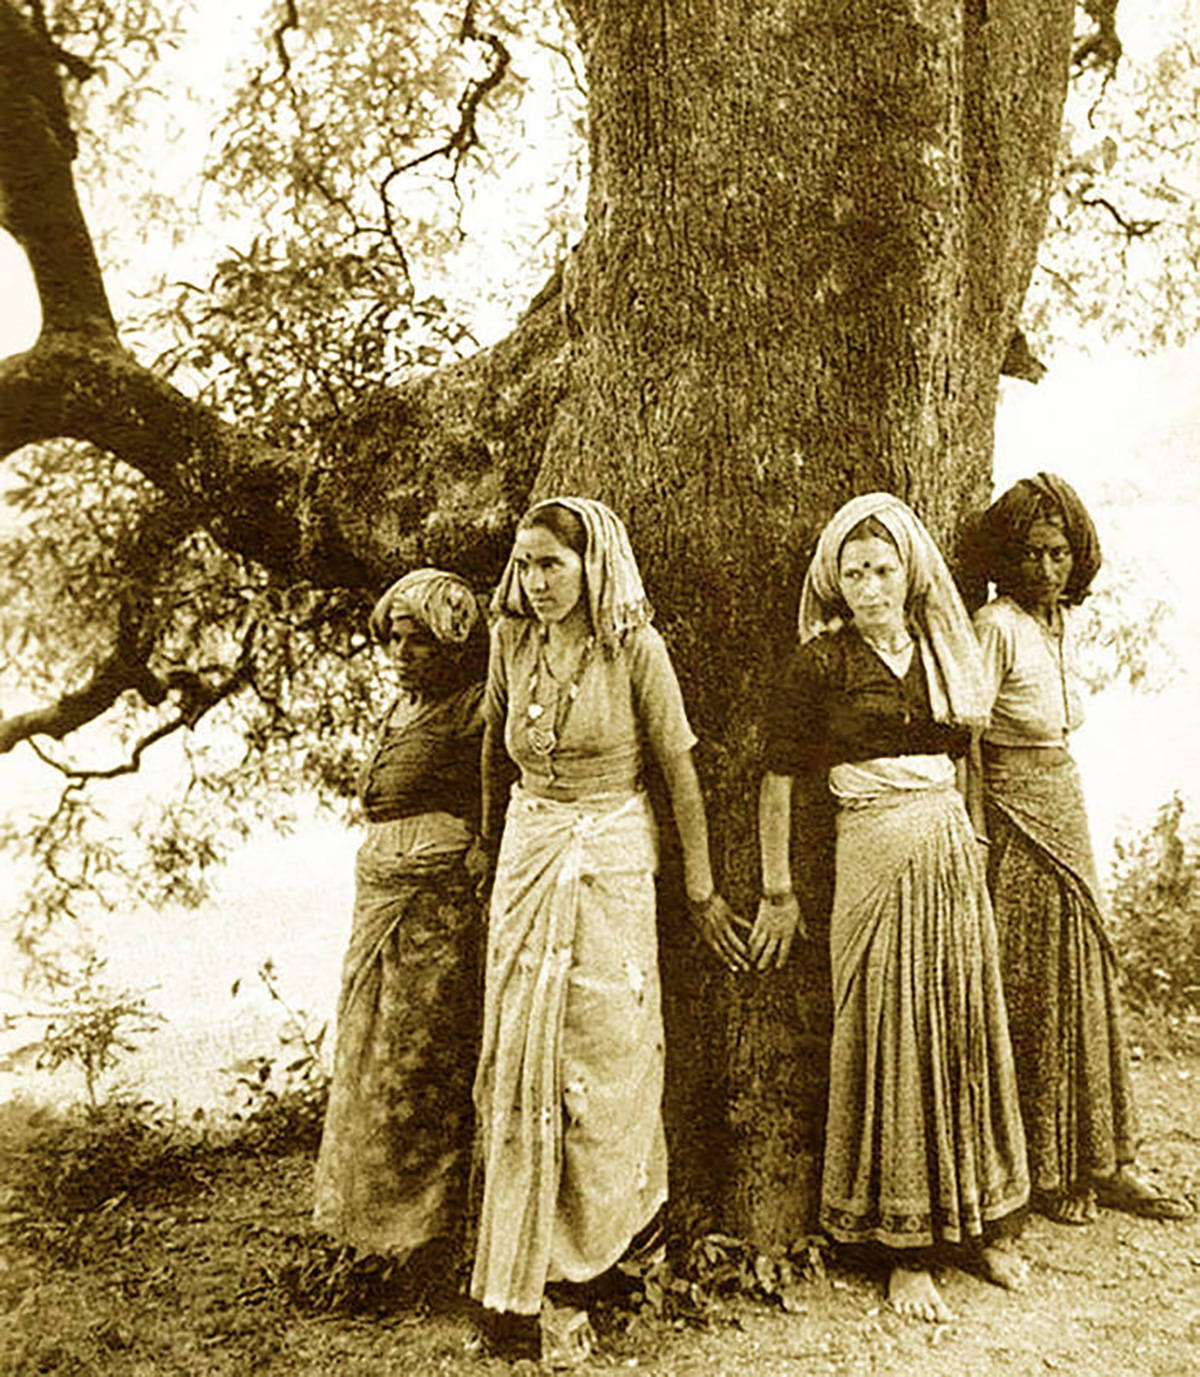 What is the chipko movement? What are its goals? How successful has it  been? - Quora